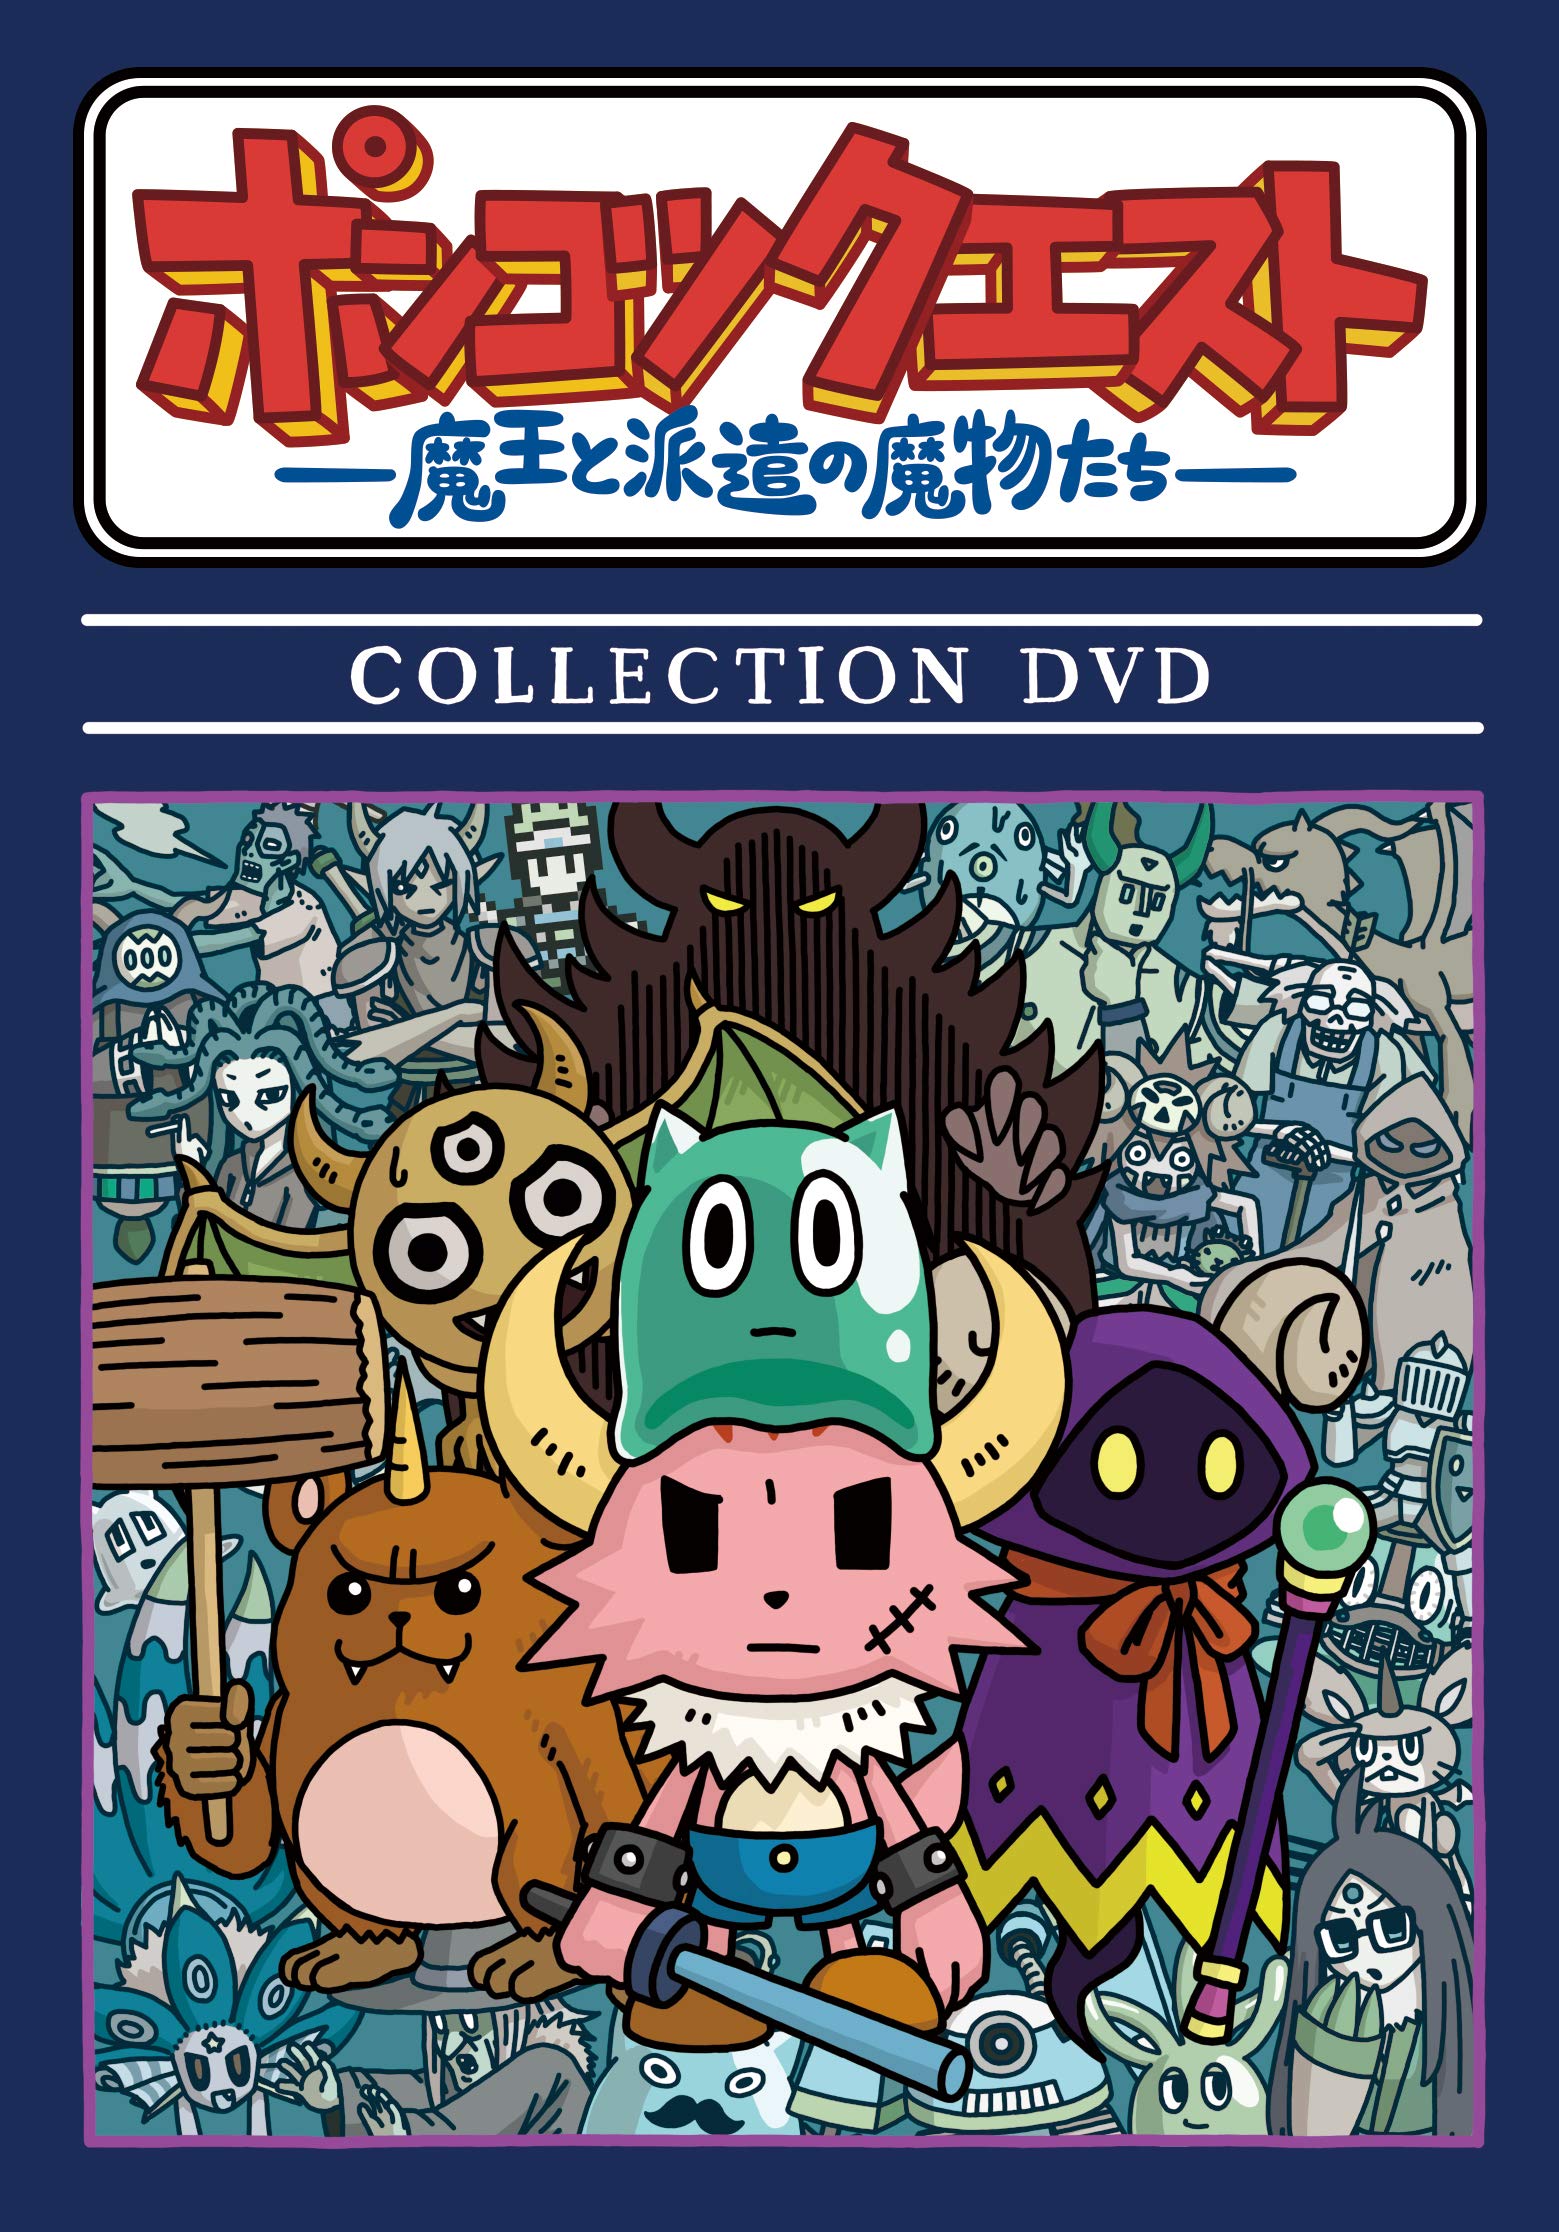 Ponkotsu Quest - Demon King and Dispatched Monsters Collection DVD